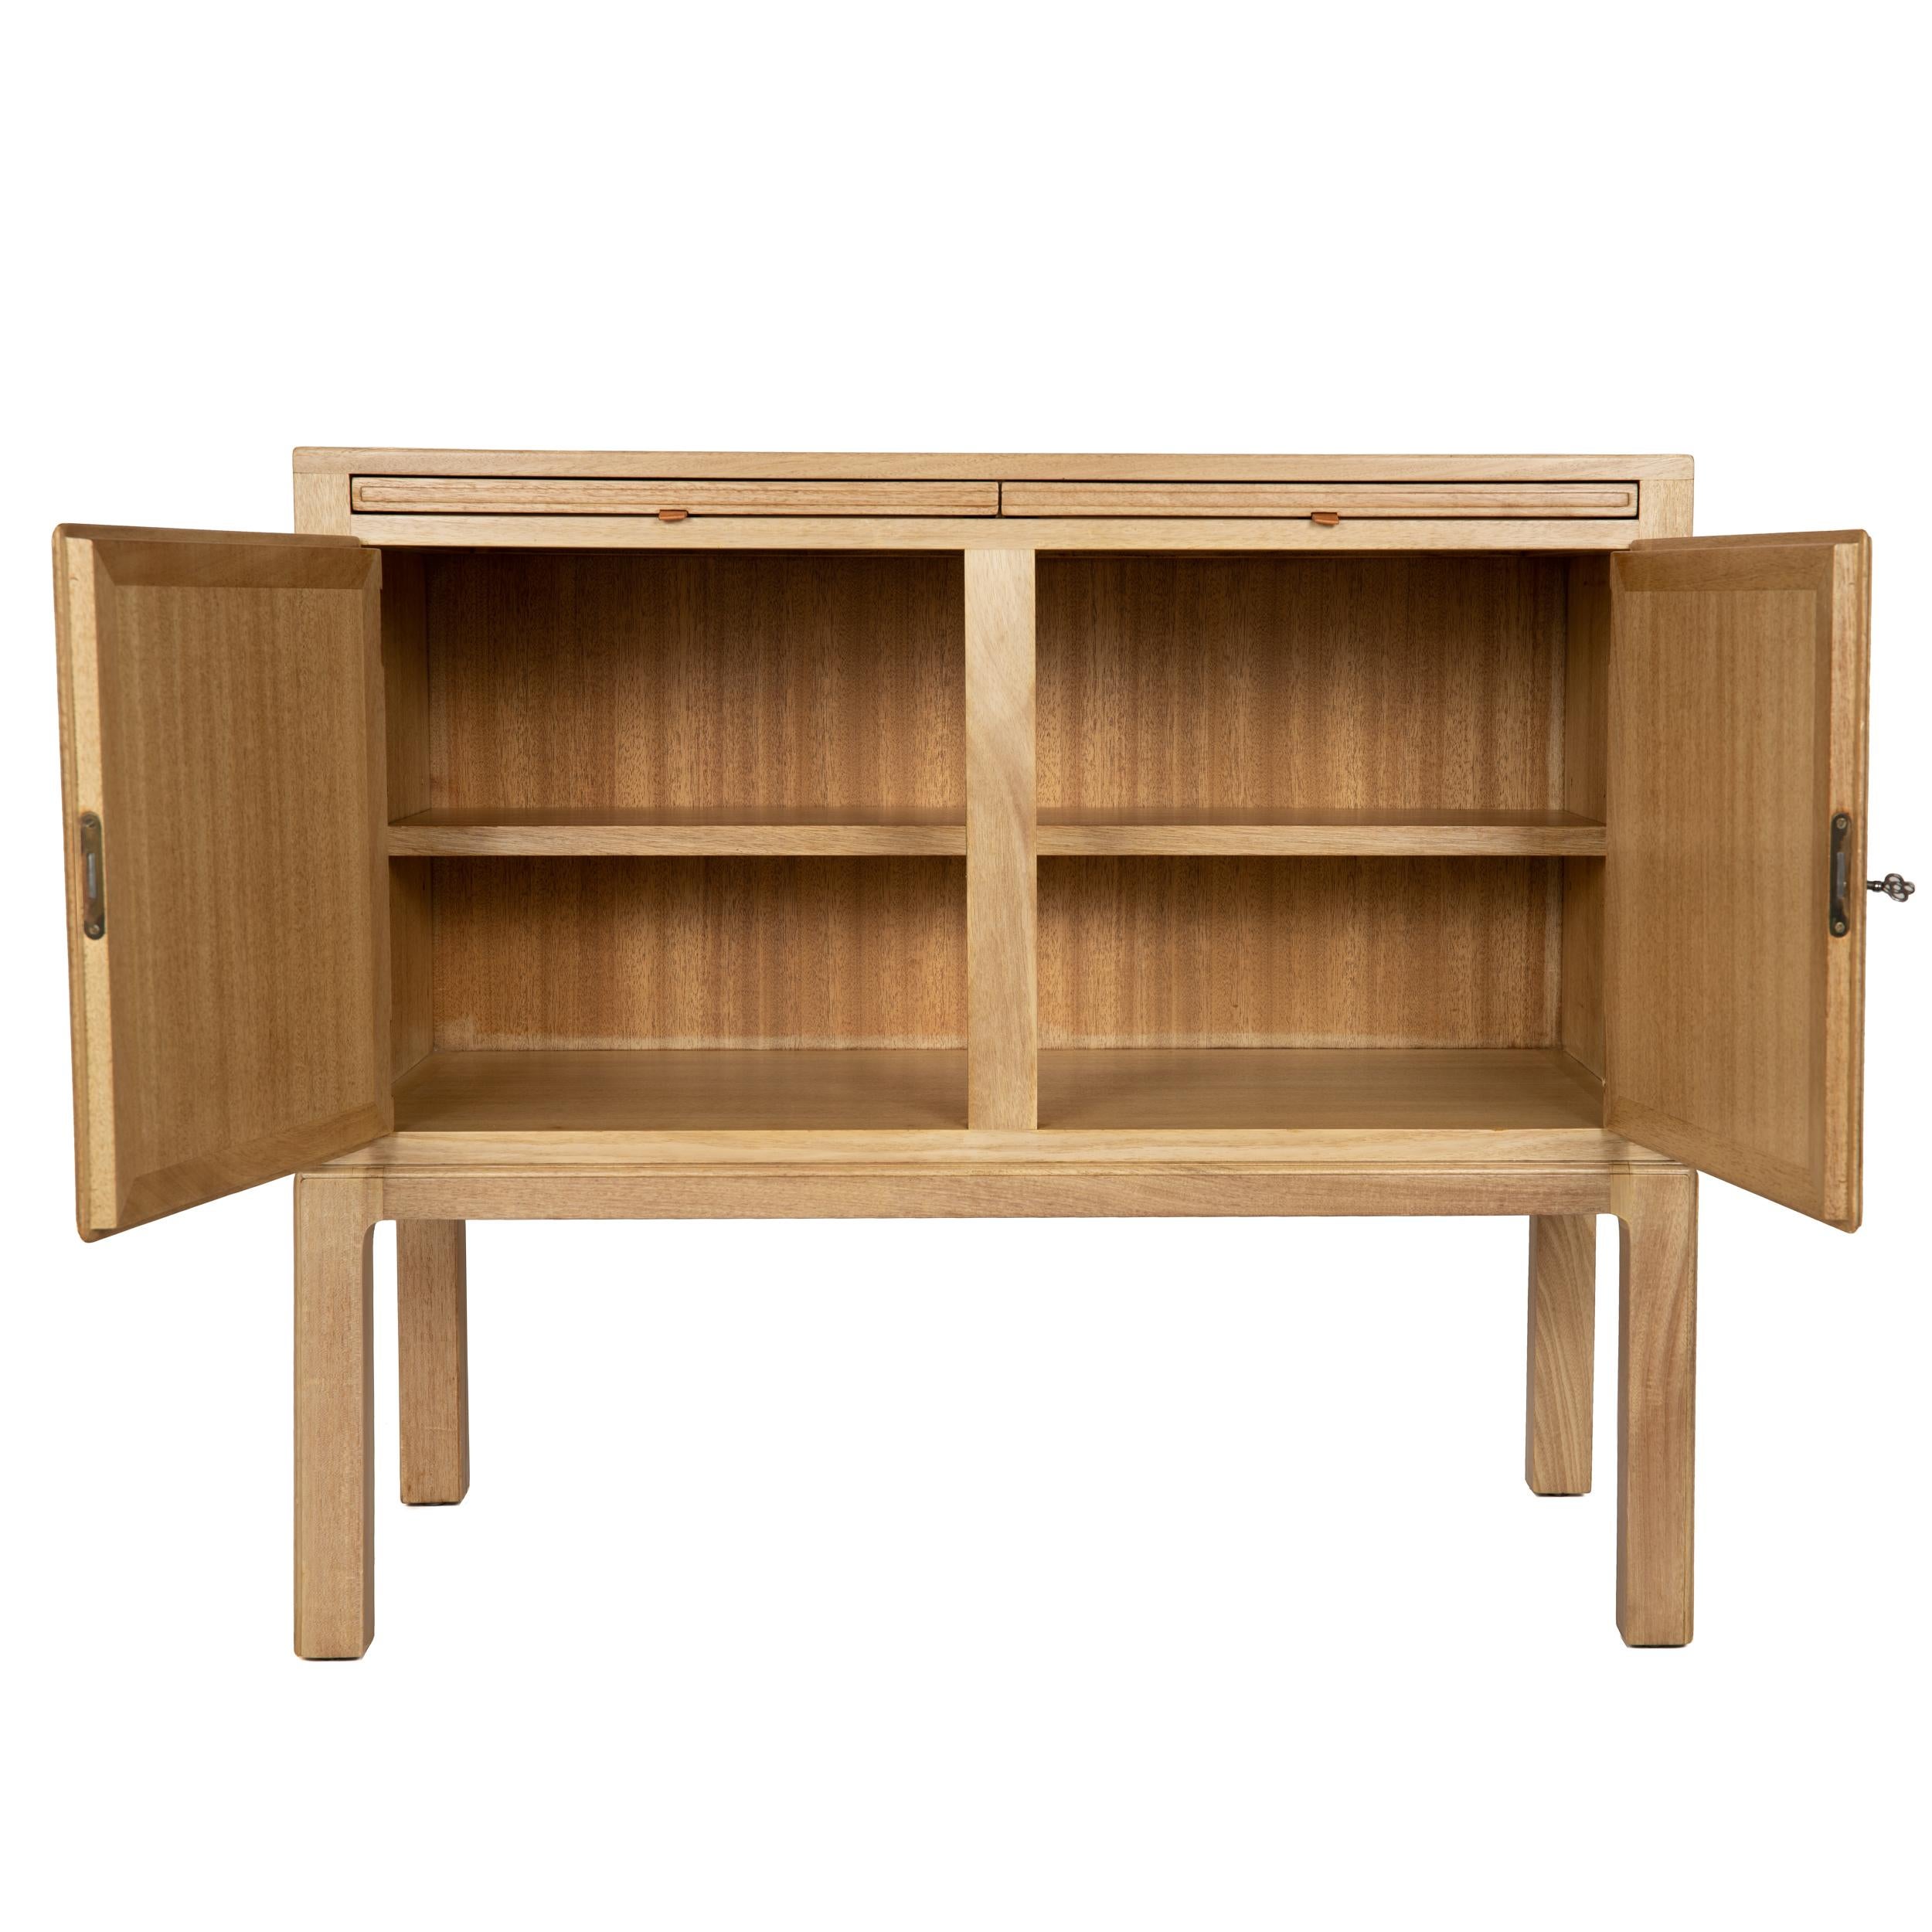 A simple cabinet with two leather tabbed pull-out shelves over two locking doors which revel an adjustable interior shelf.